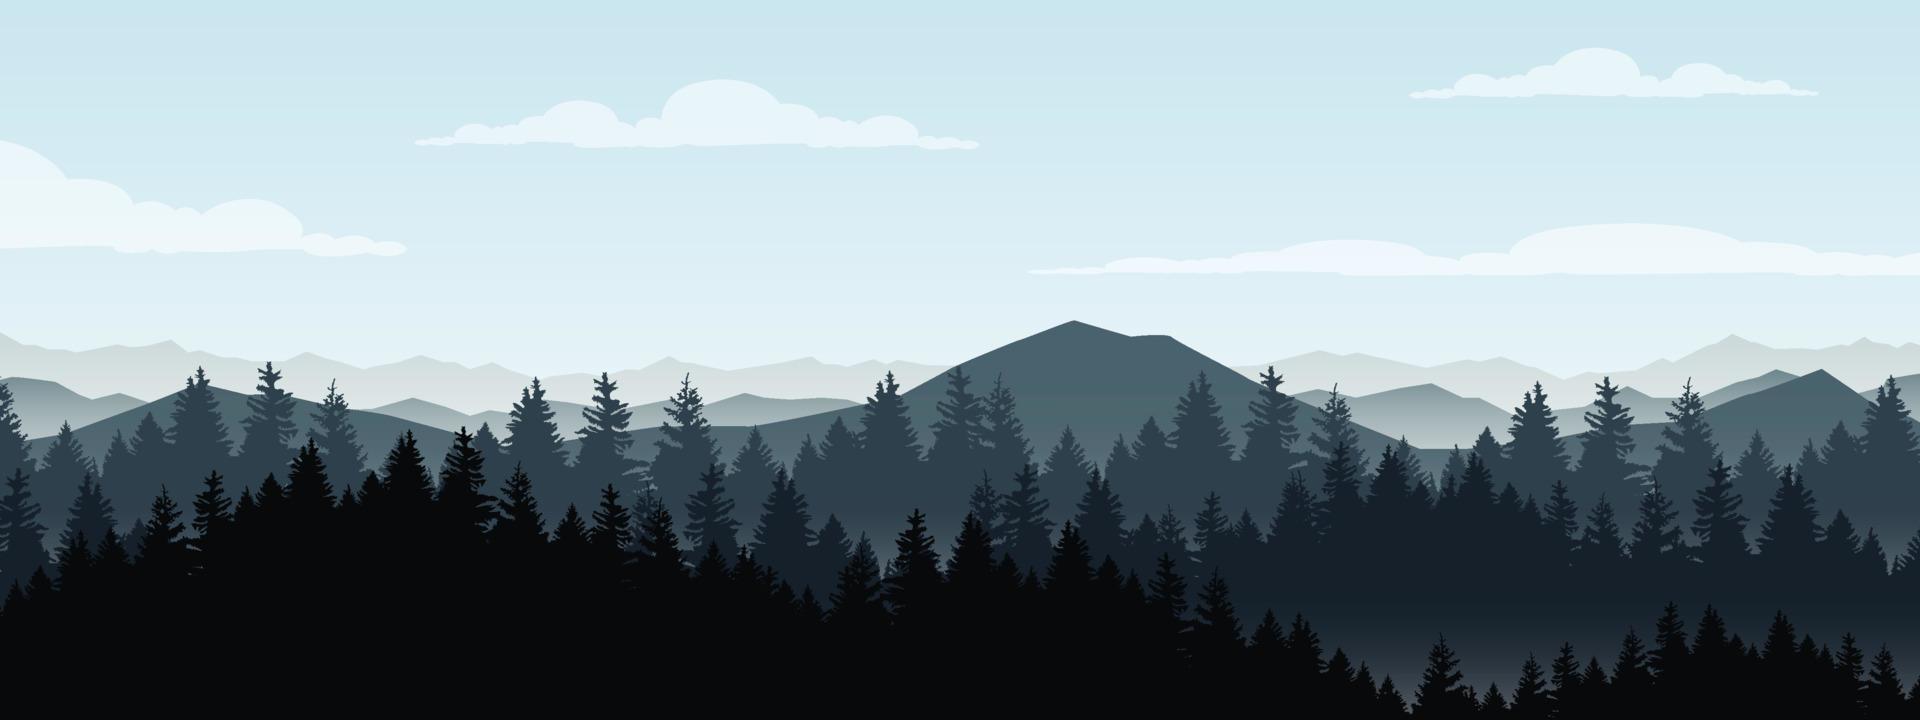 forest mountain and lake landscape at sunrise and sunset. vector